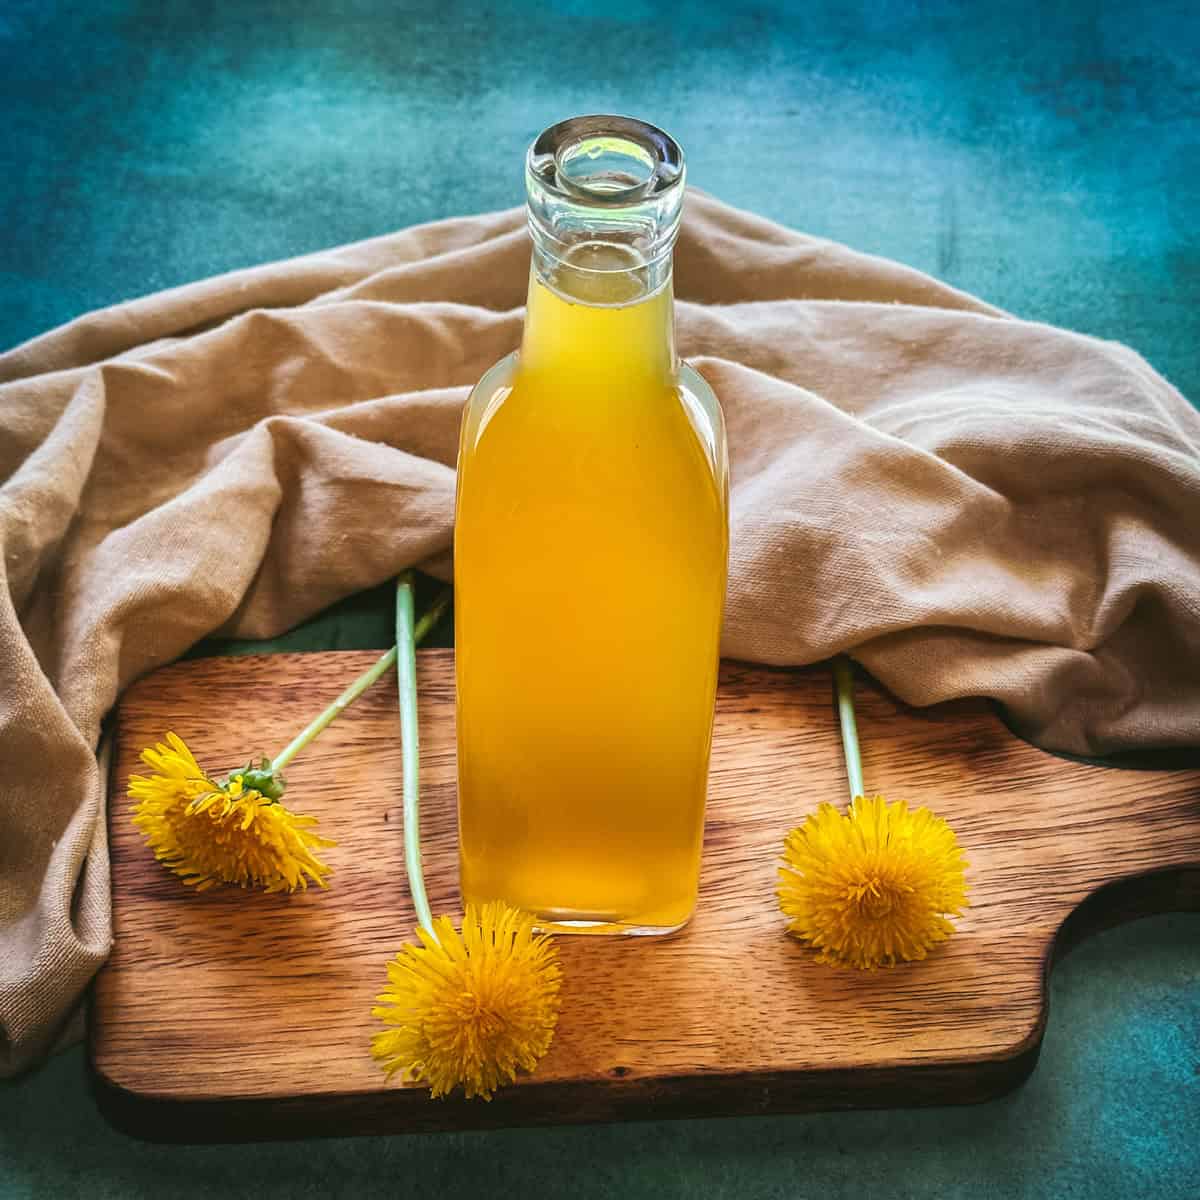 A bottle of yellow dandelion syrup on a wood cutting board surrounded by fresh dandelion flowers, natural fabric, and a teal background. 